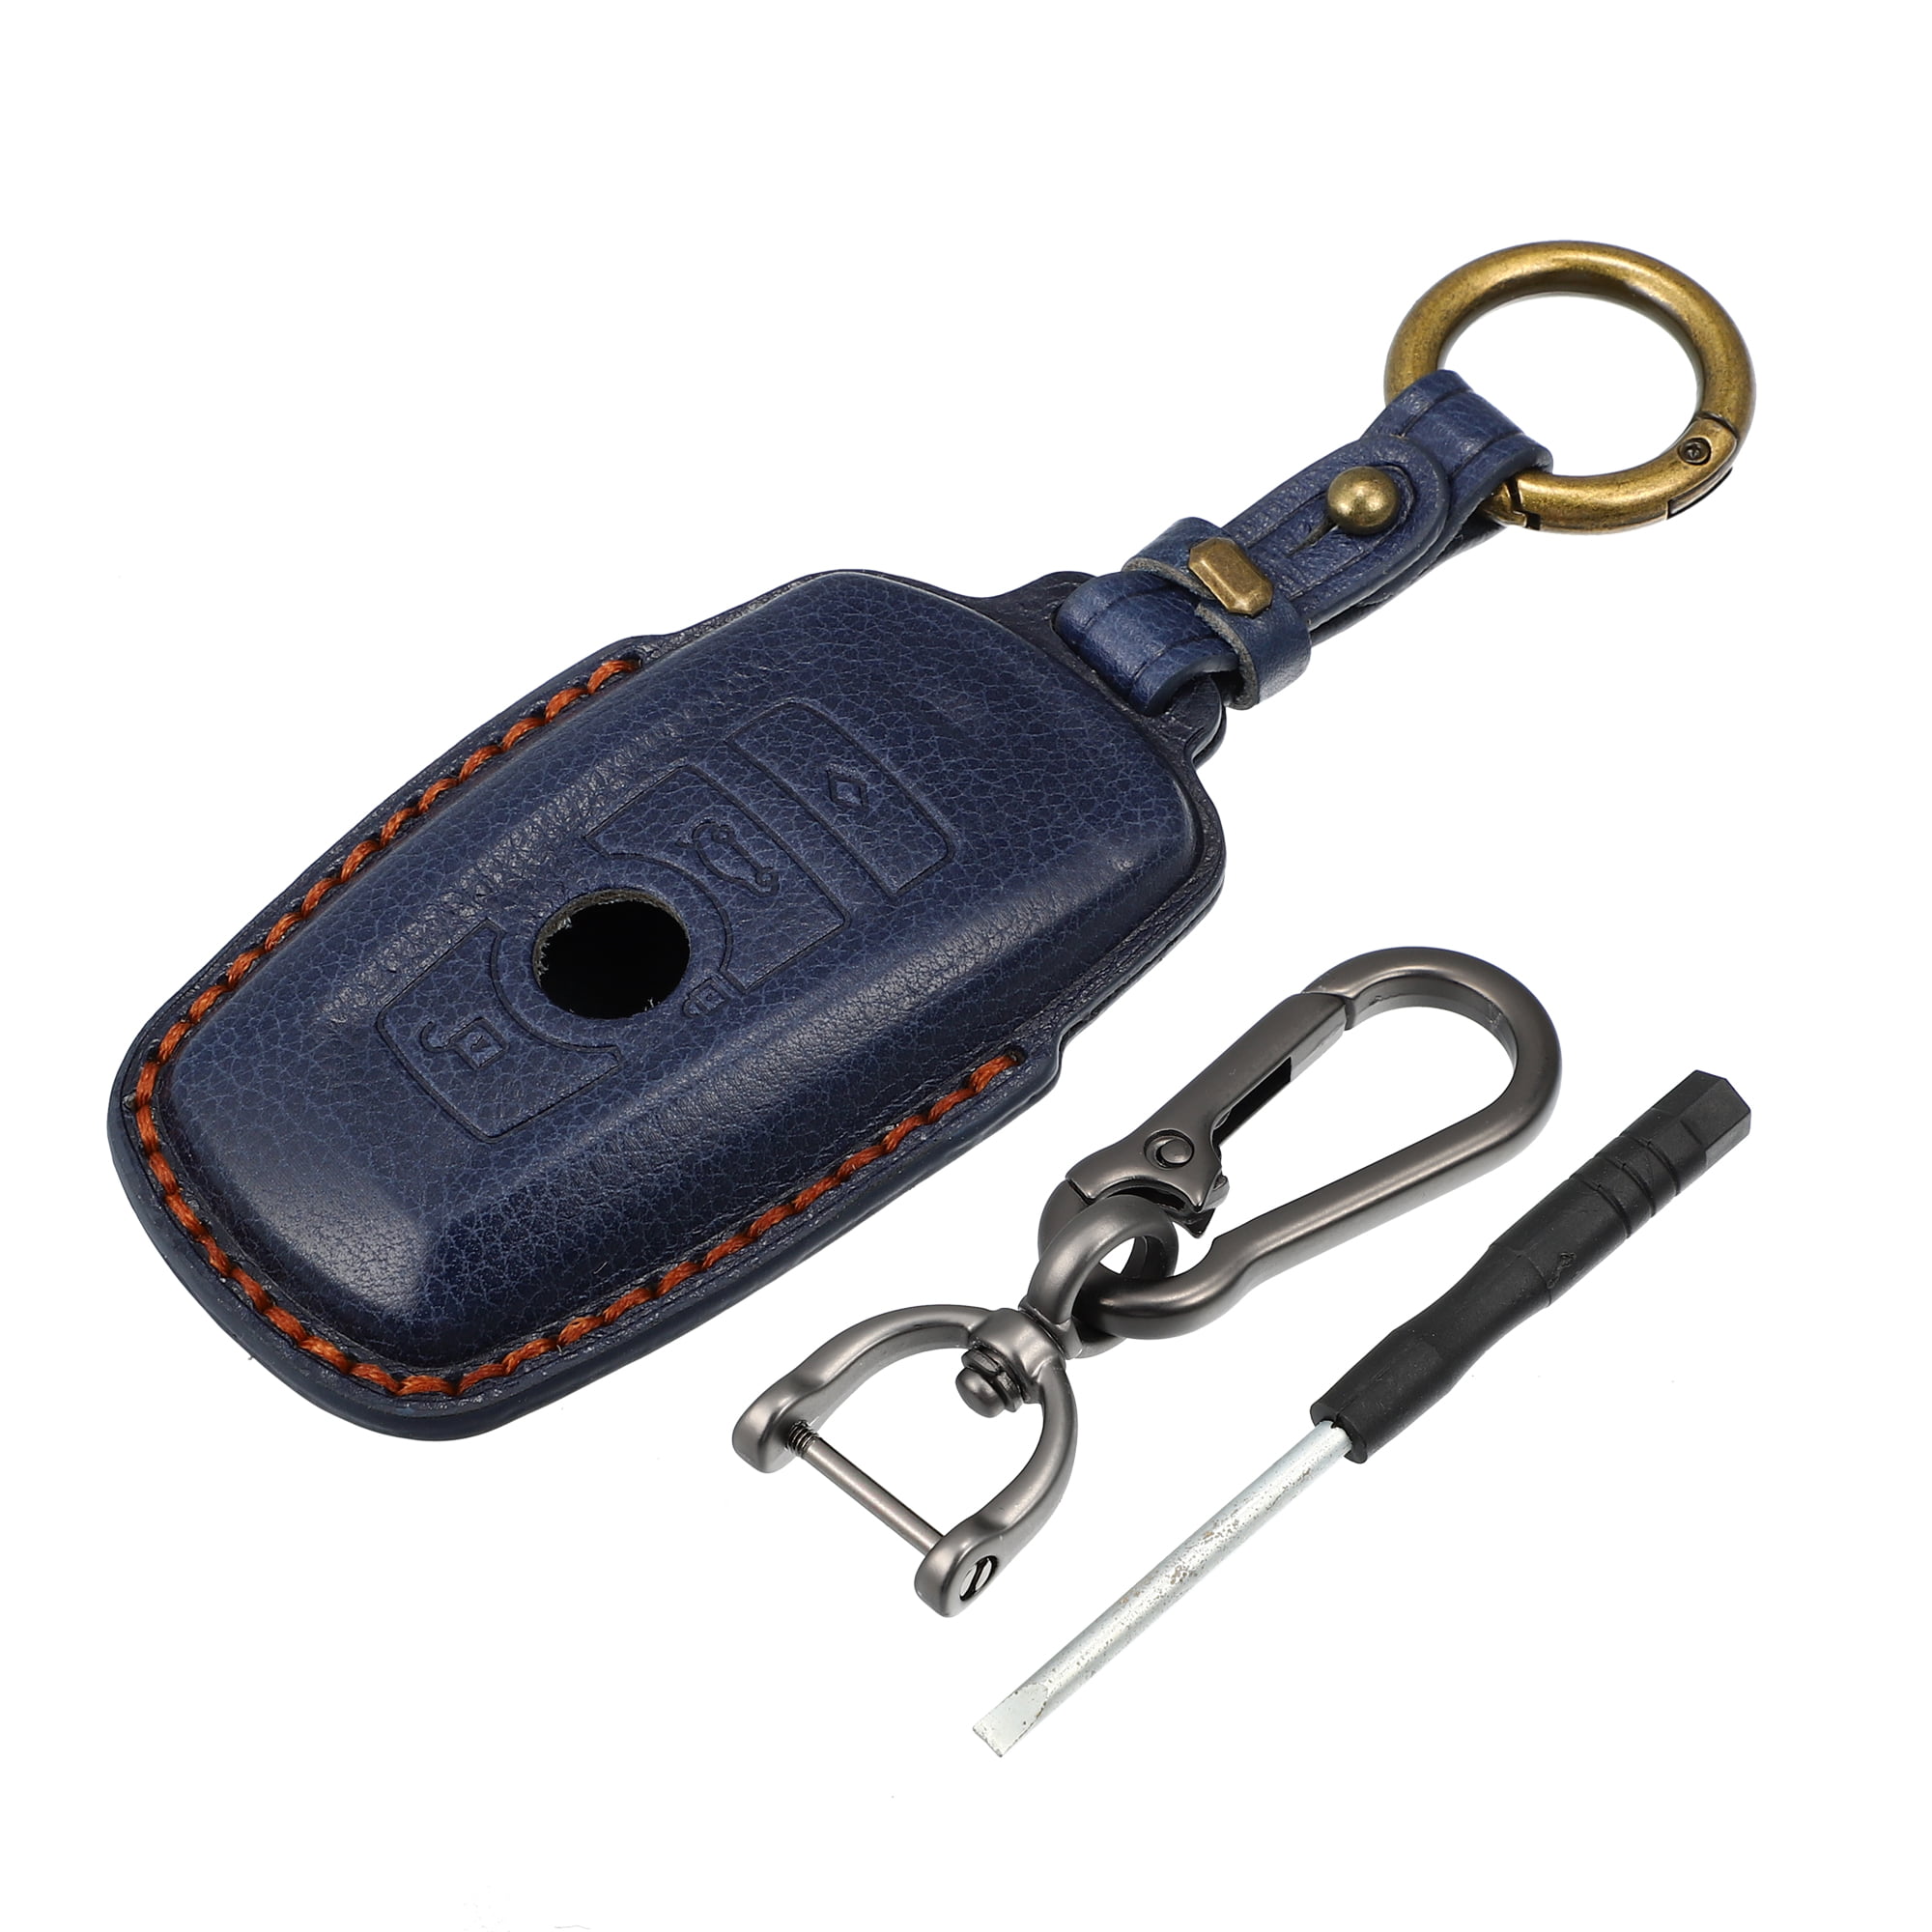 Pure Handmade Leather BMW Car Key Cover, Suitable for BMW Key